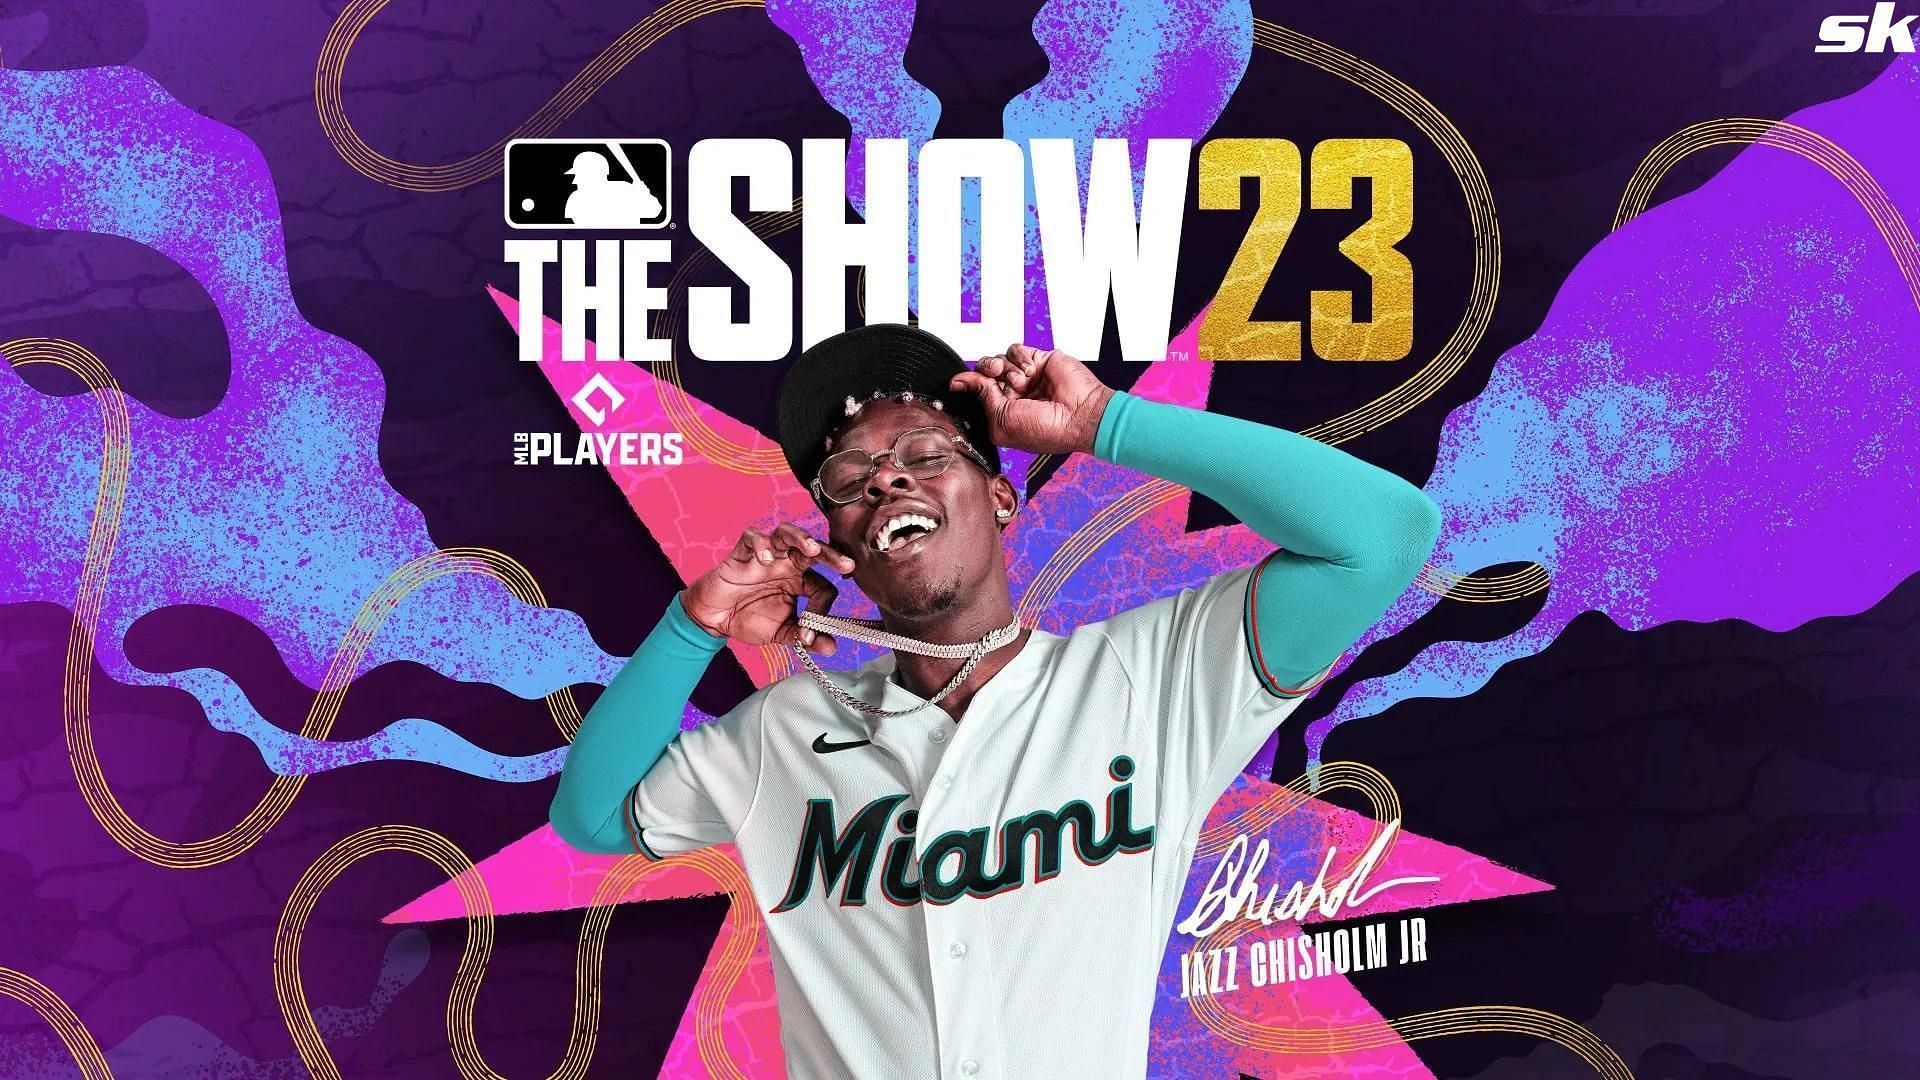 Mlb the show 23 easter update｜TikTok Search